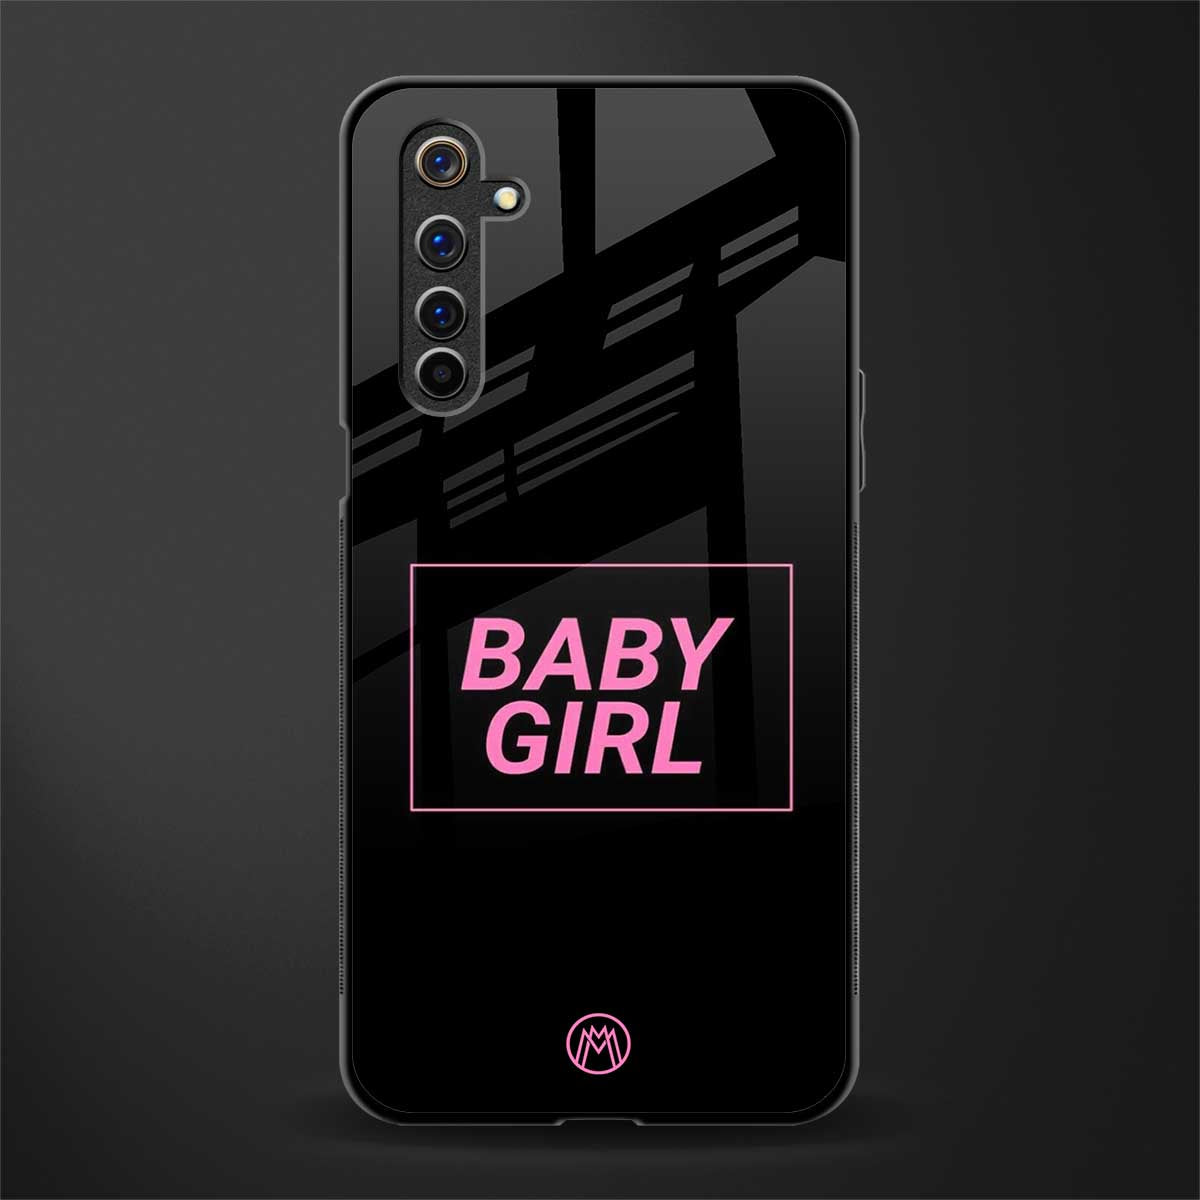 baby girl glass case for realme 6 pro image